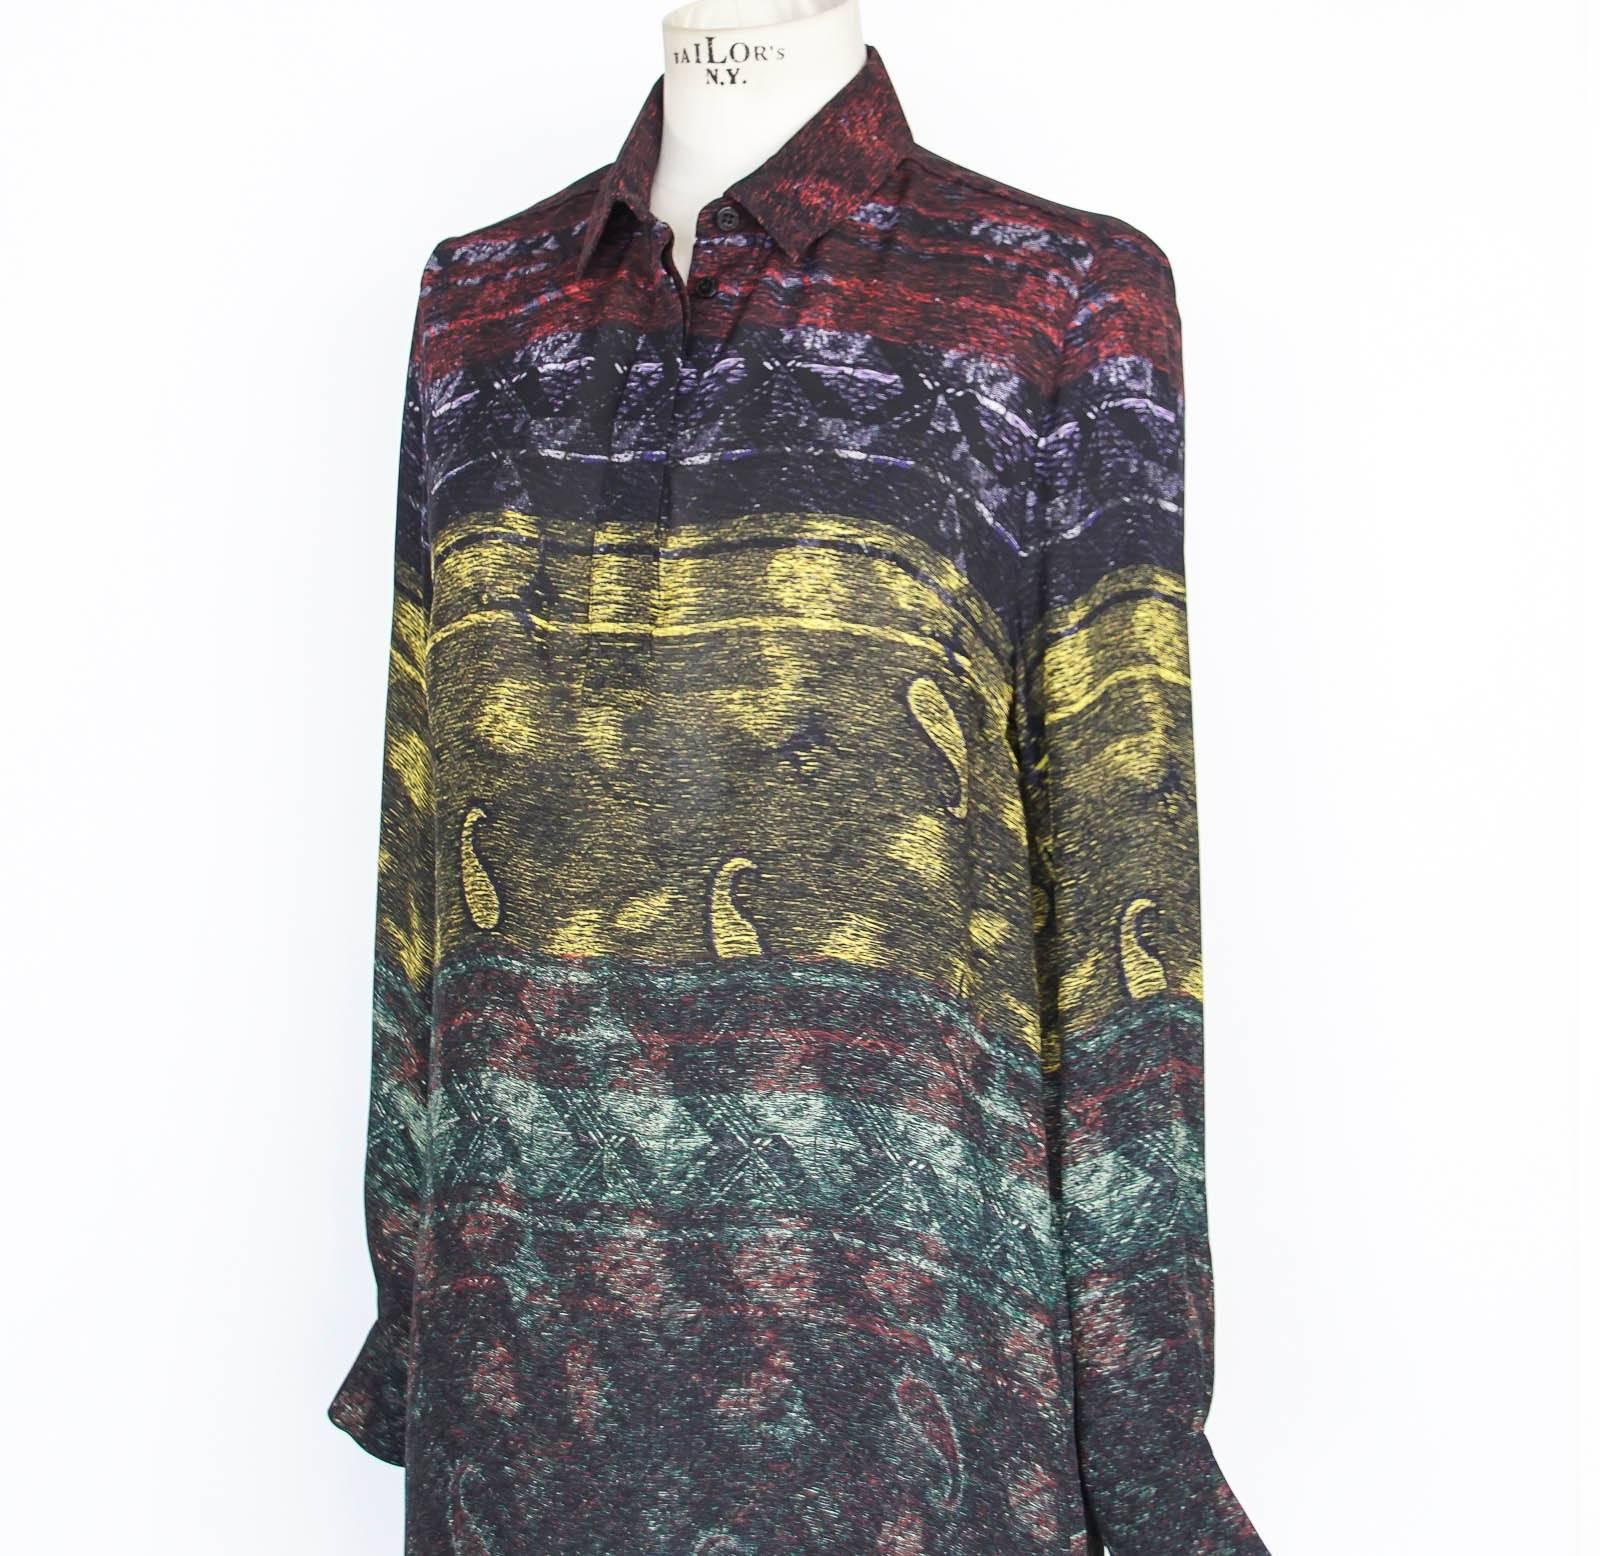 Mary Katrantzou paisley print tunic in dark shades of red, green, yellow and purple.
Muted print in rich colours makes this perfect for year round wear.
Peak collar and 3 embossed buttons in front.
Fabric is 100% silk.
final sale

SIZE XS

TOP